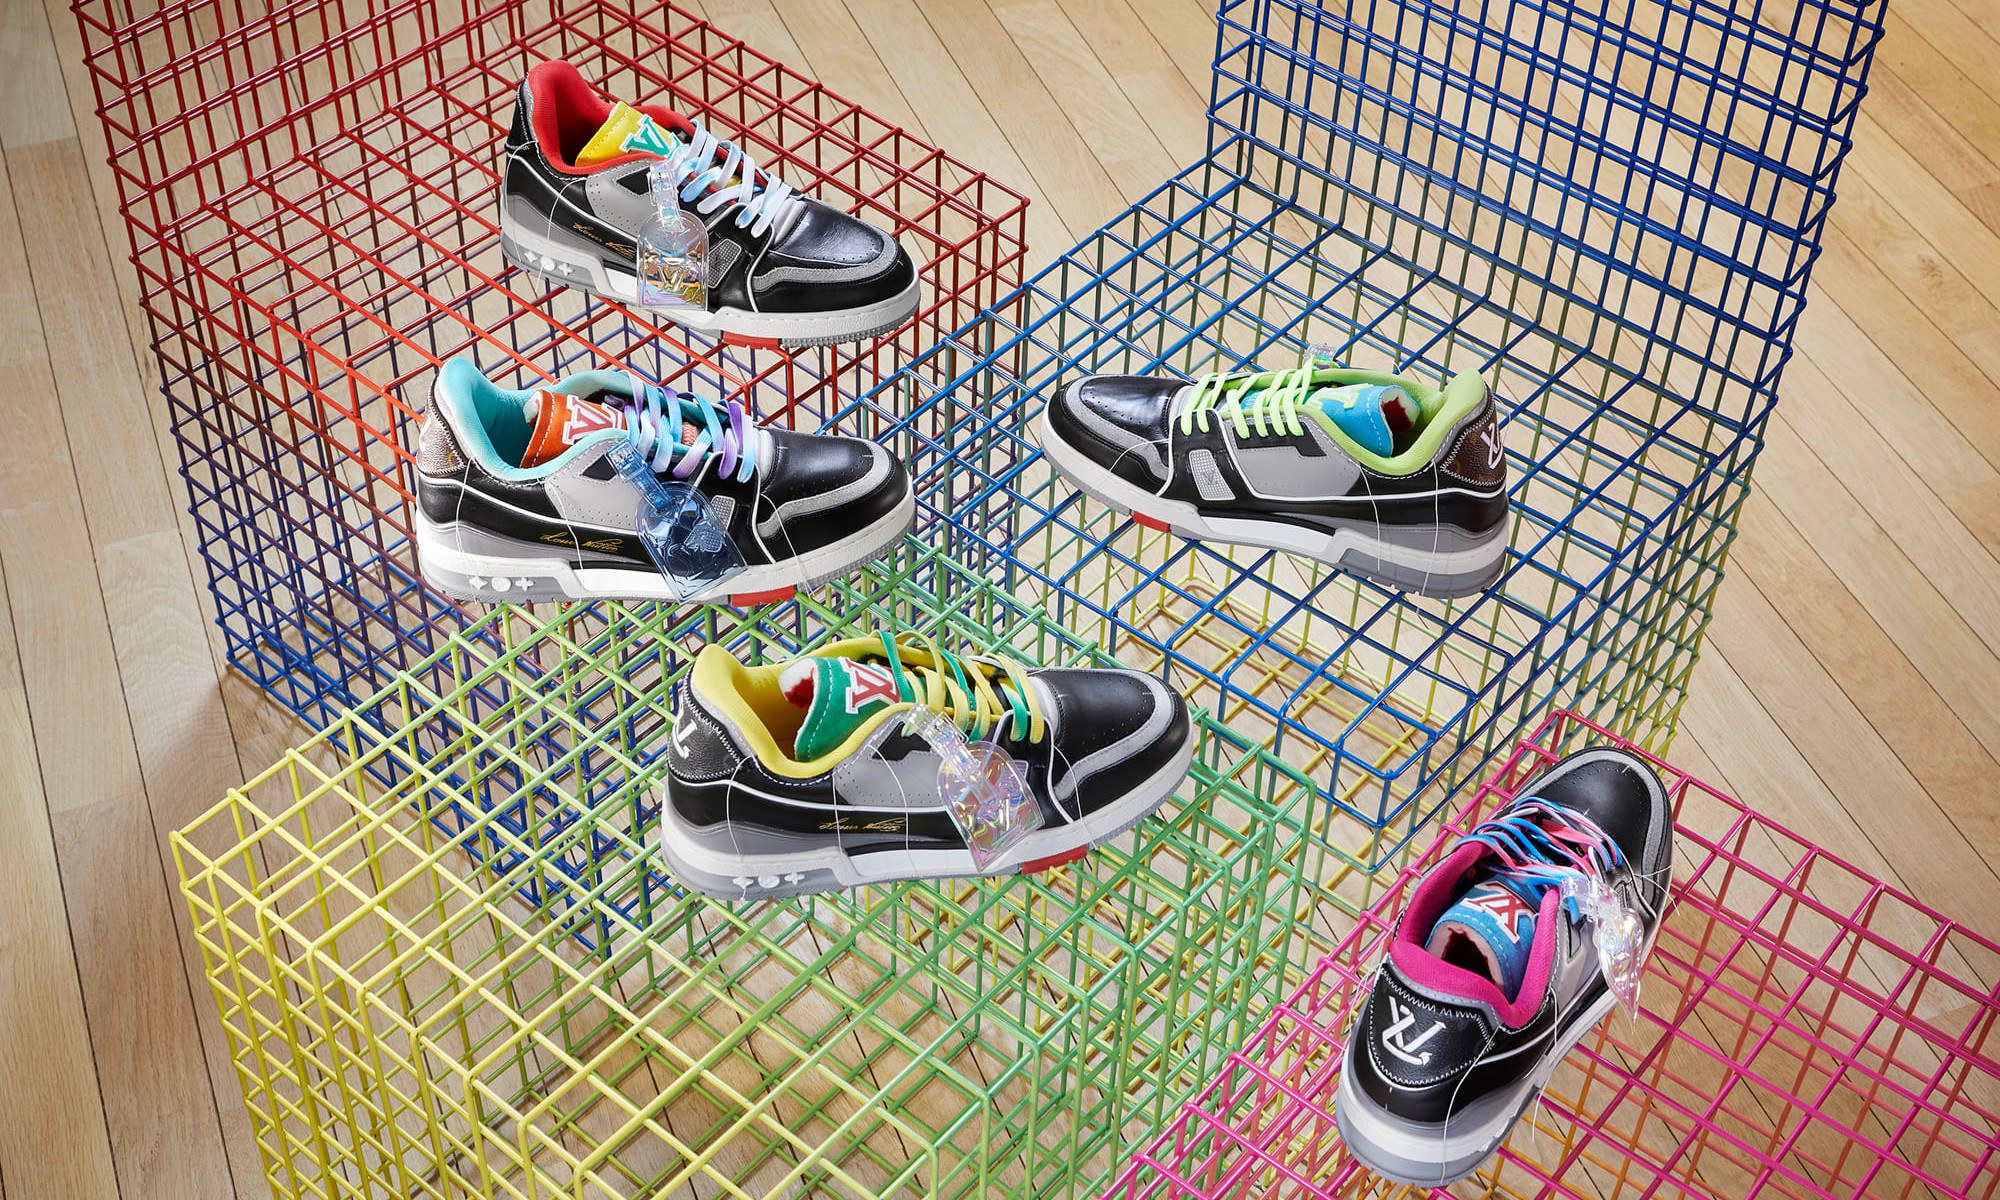 LOUIS VUITTON 发布 2021 春夏系列鞋款「Trainer Upcycling」